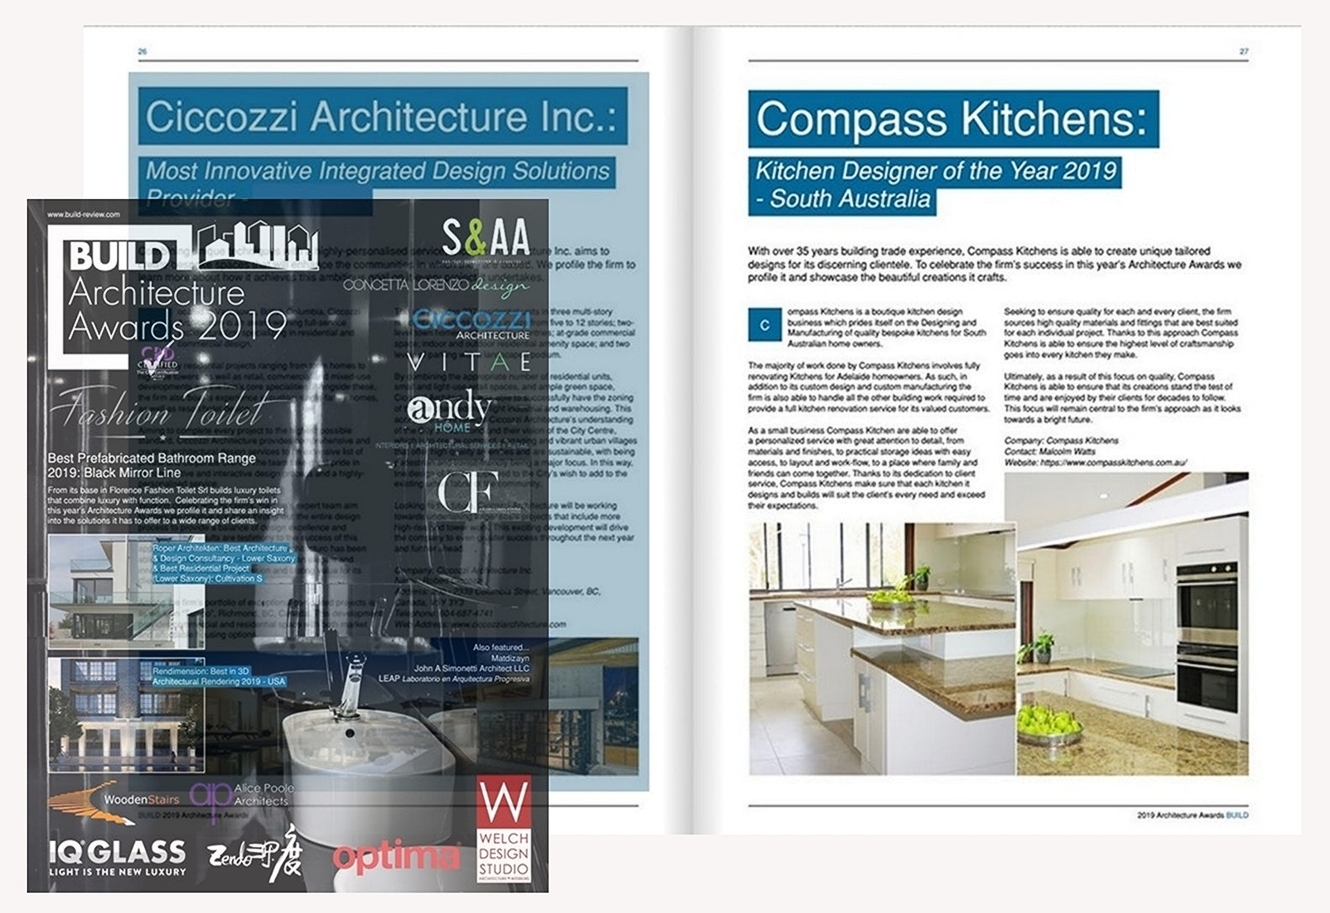 Kitchen Designer of the year 2019, Compass Kitchens of Adelaide